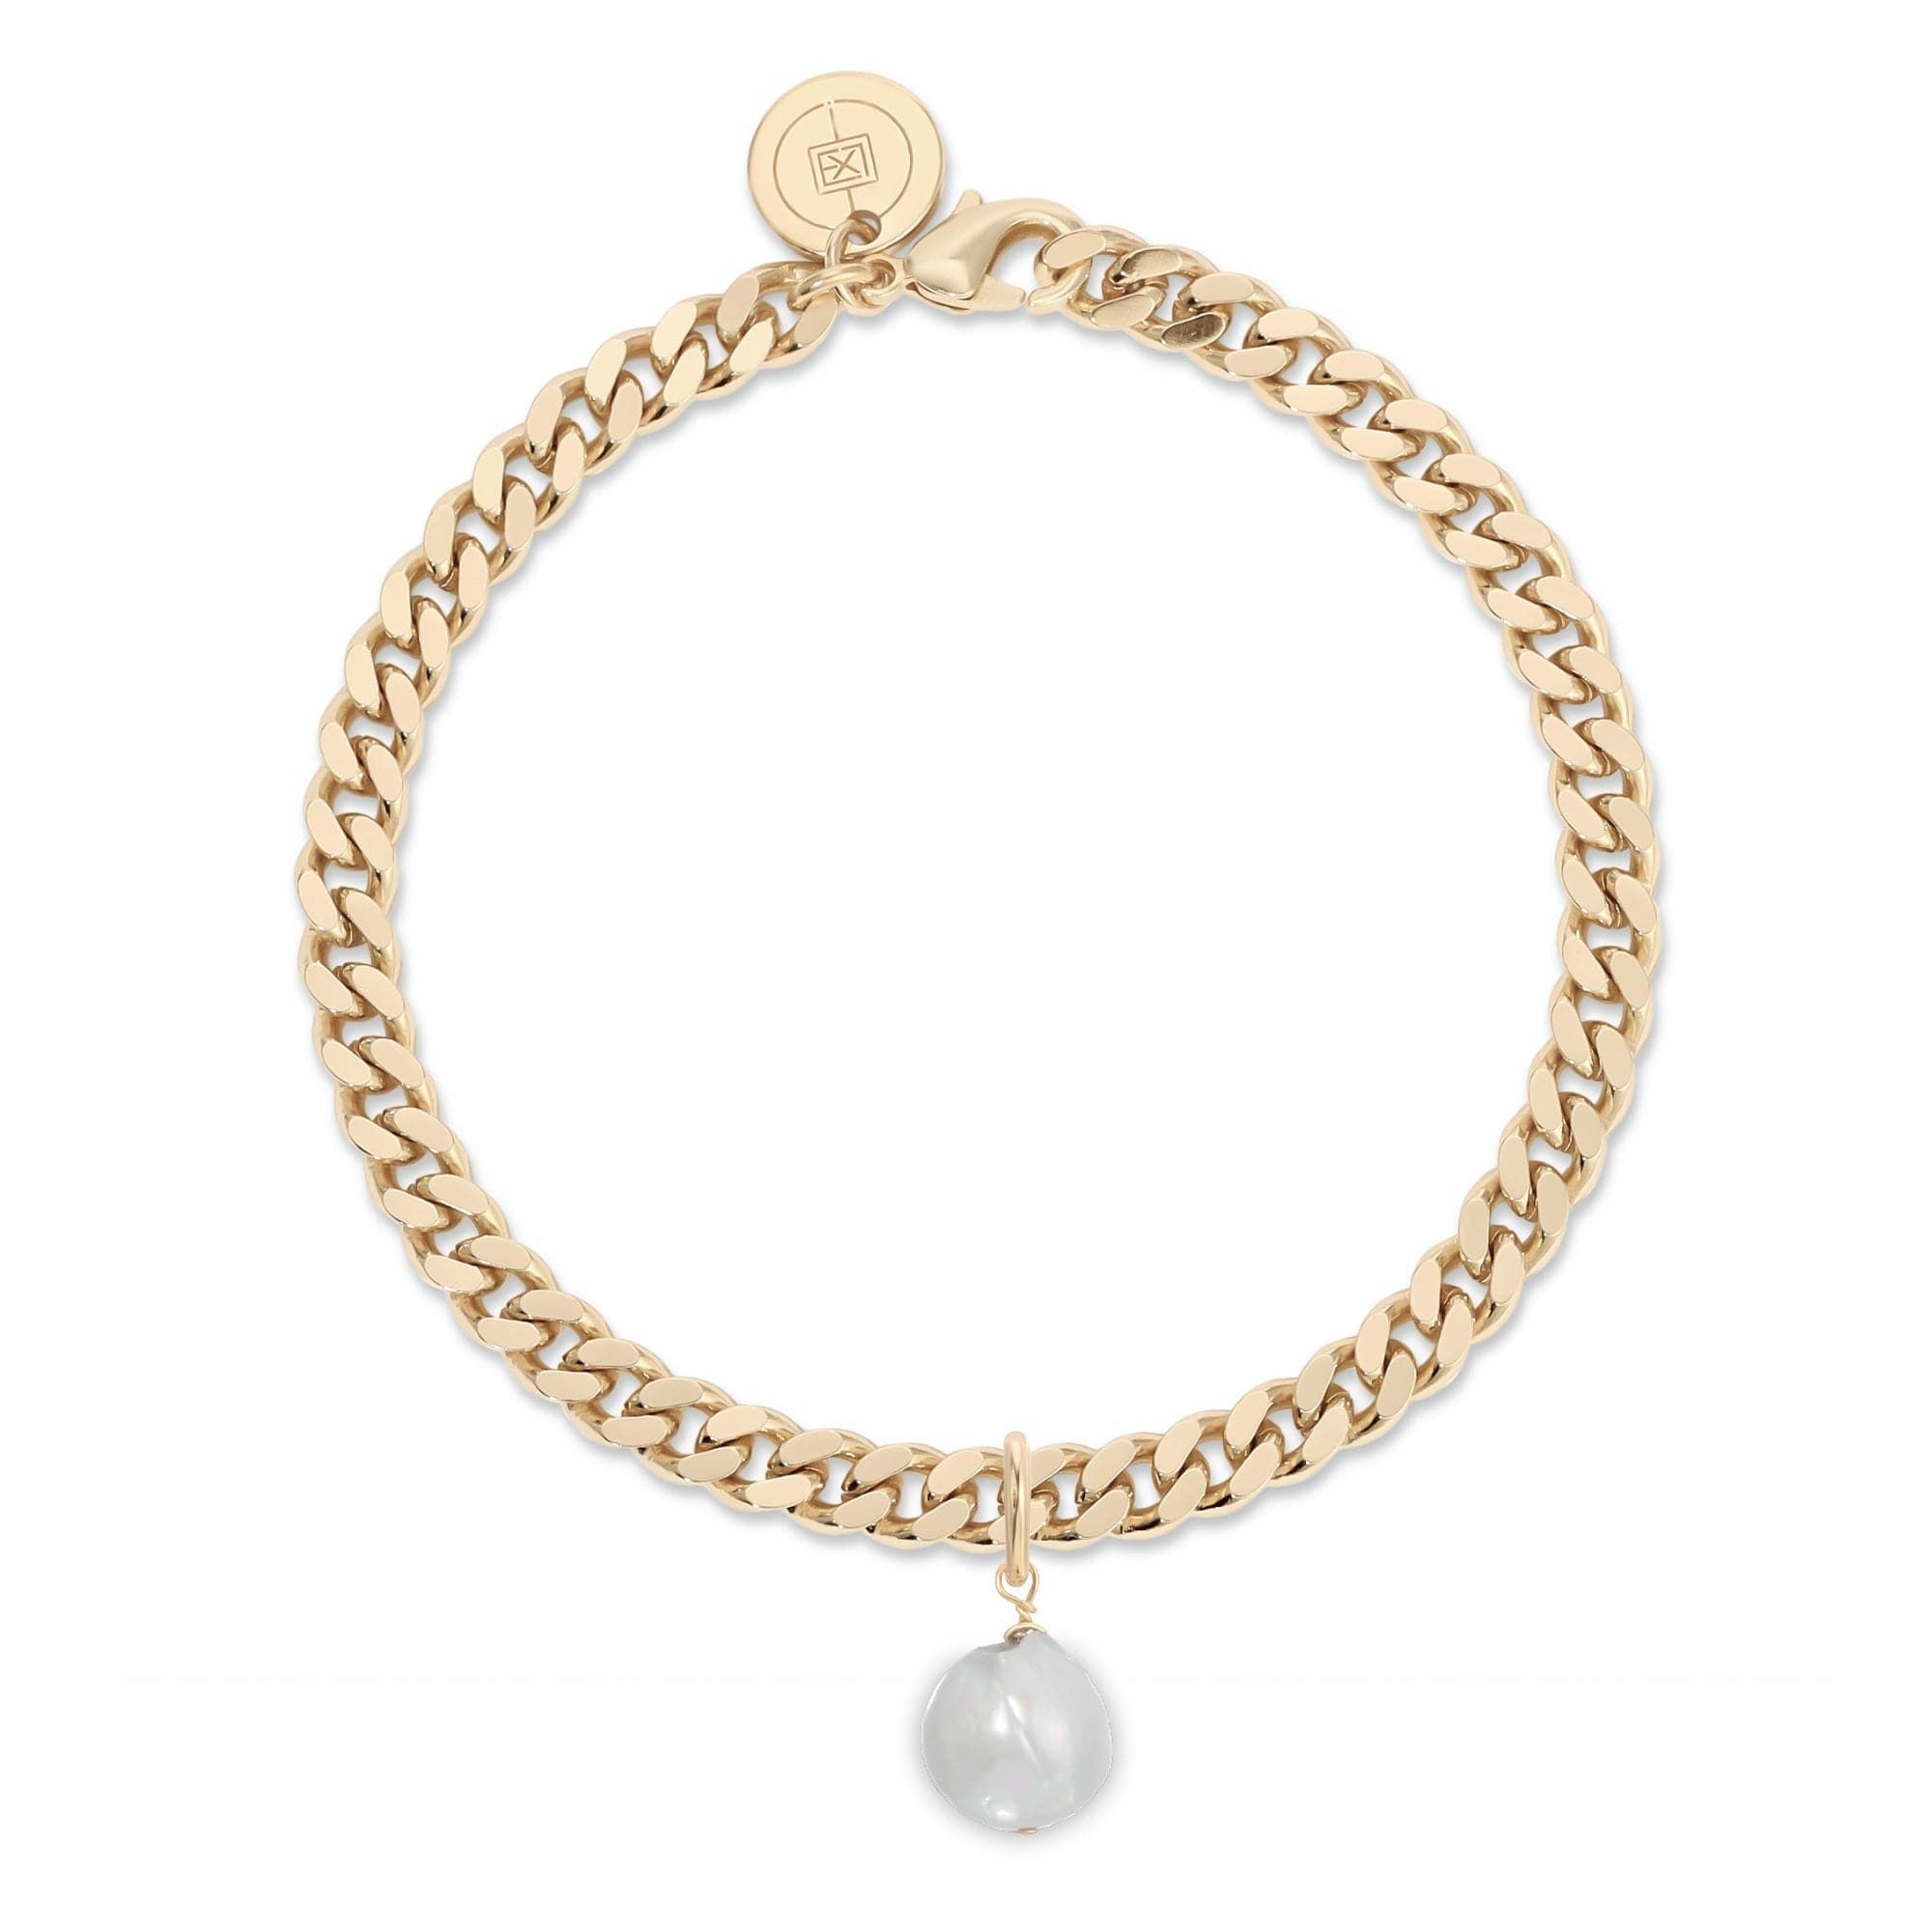 a gold chain bracelet with a white stone charm